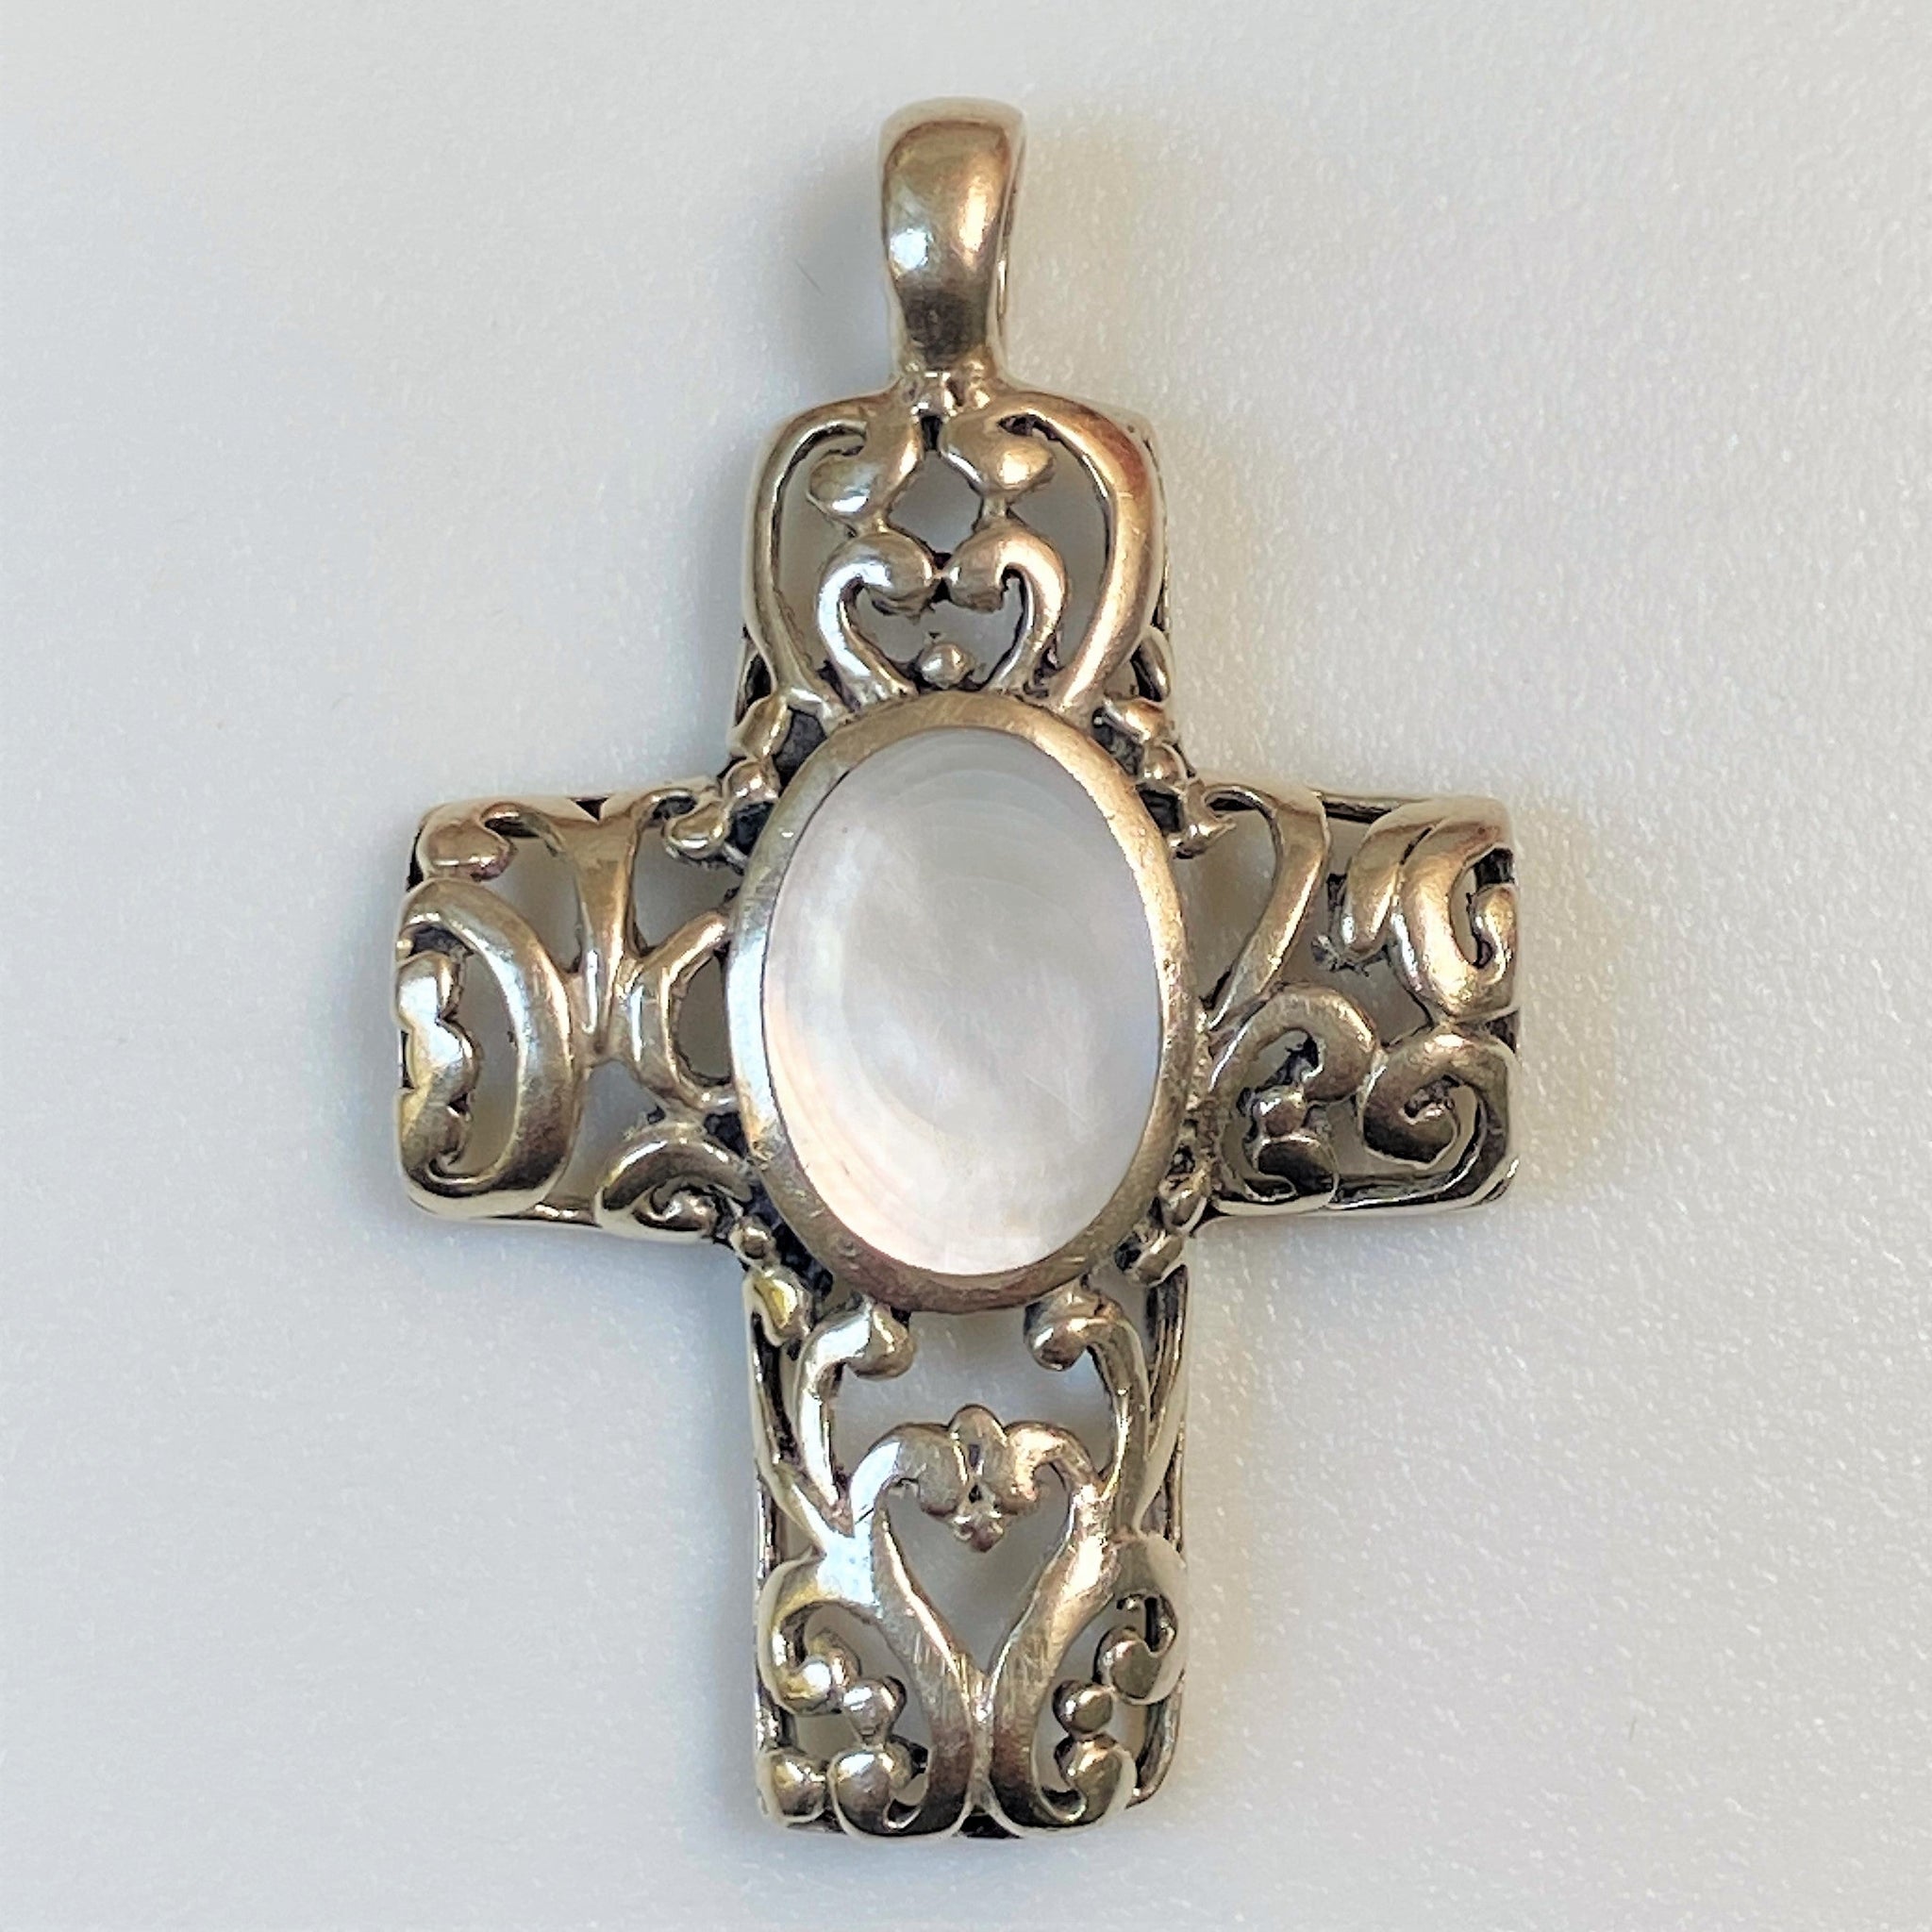 Silver and Mother-of-Pearl Cross Pendant